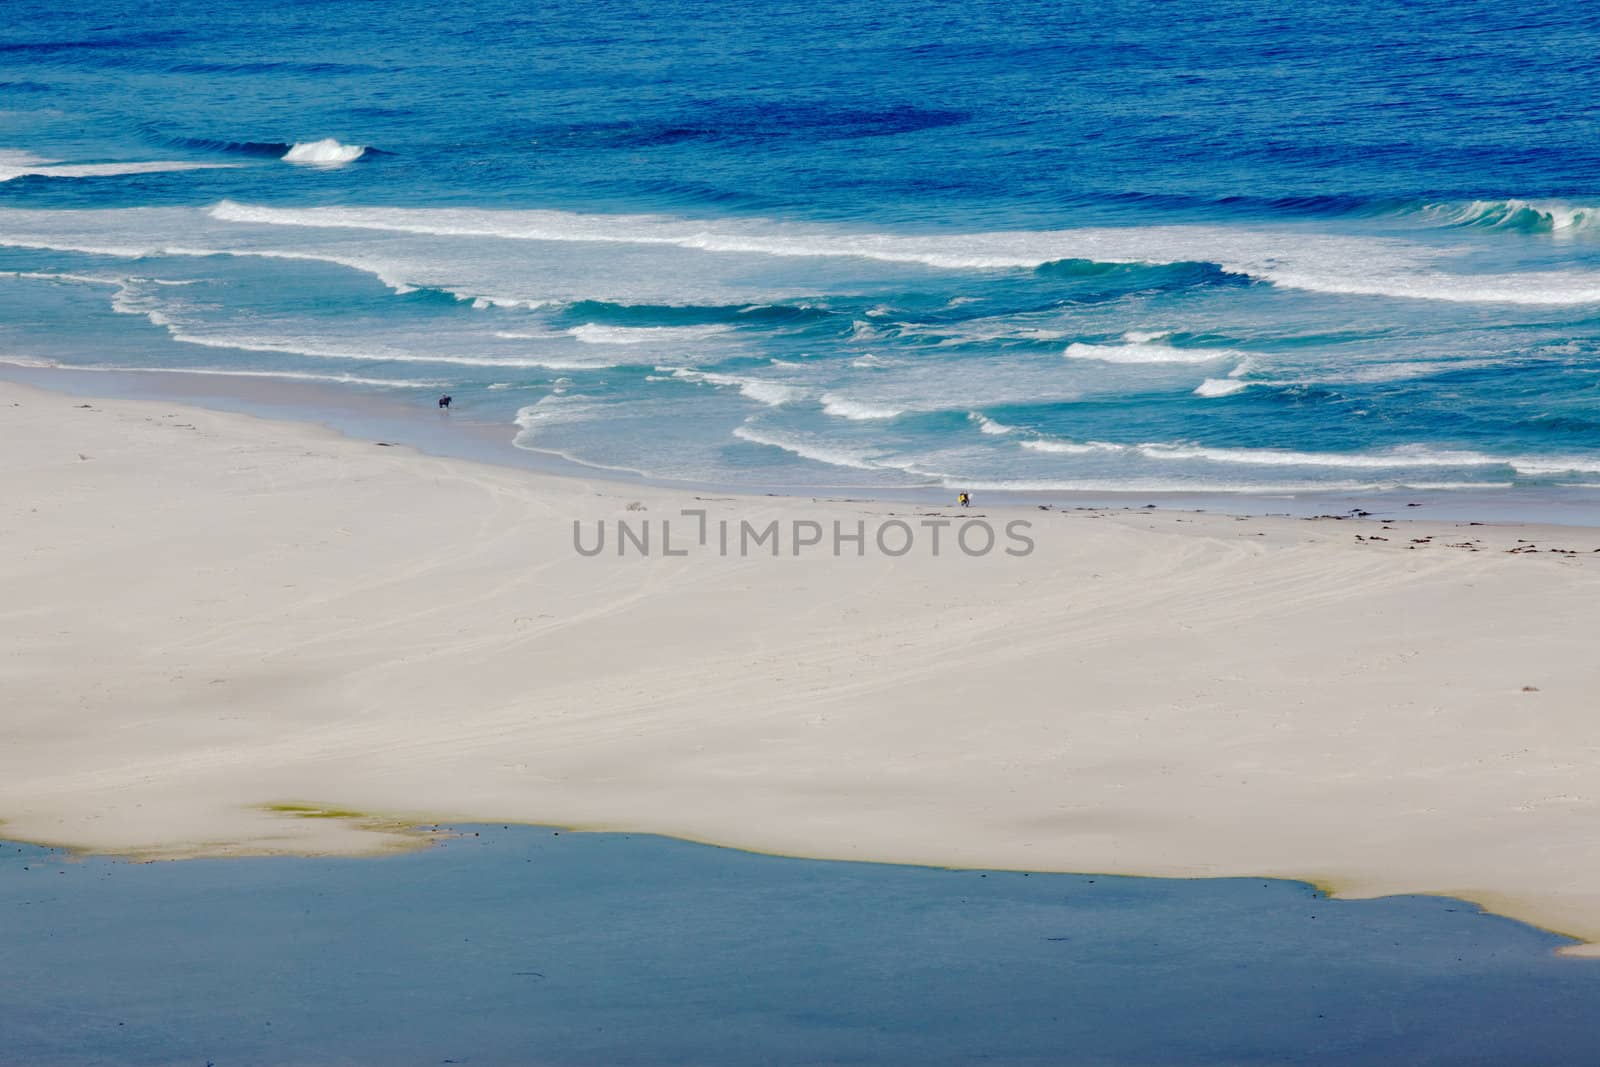 A horse rider and surfer at Long Beach in the Cape Peninsula, South Africa.